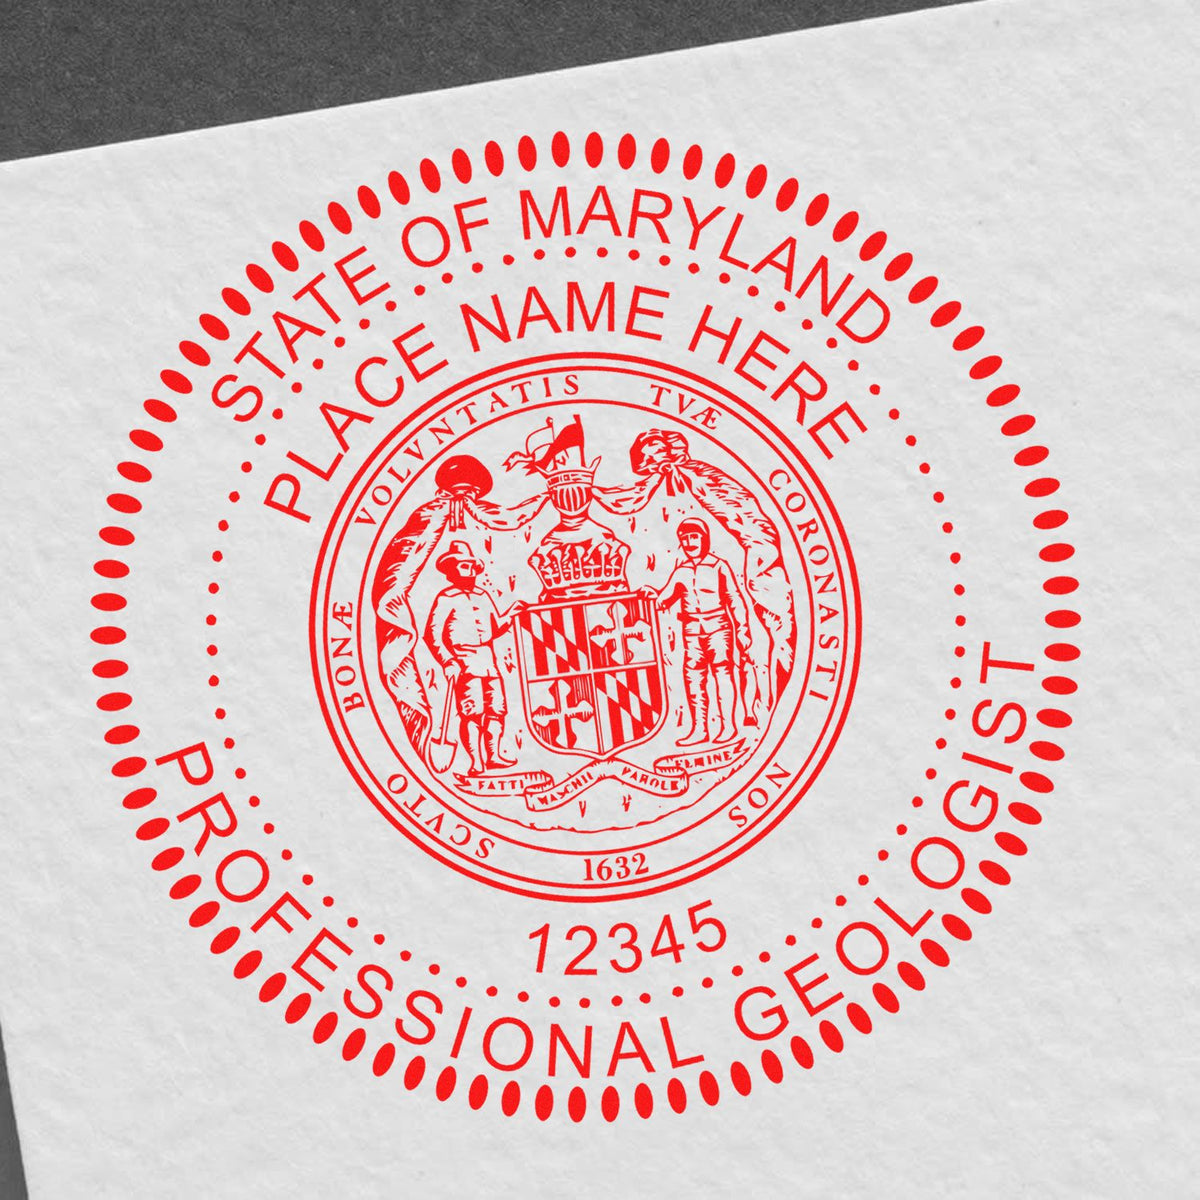 An in use photo of the Slim Pre-Inked Maryland Professional Geologist Seal Stamp showing a sample imprint on a cardstock